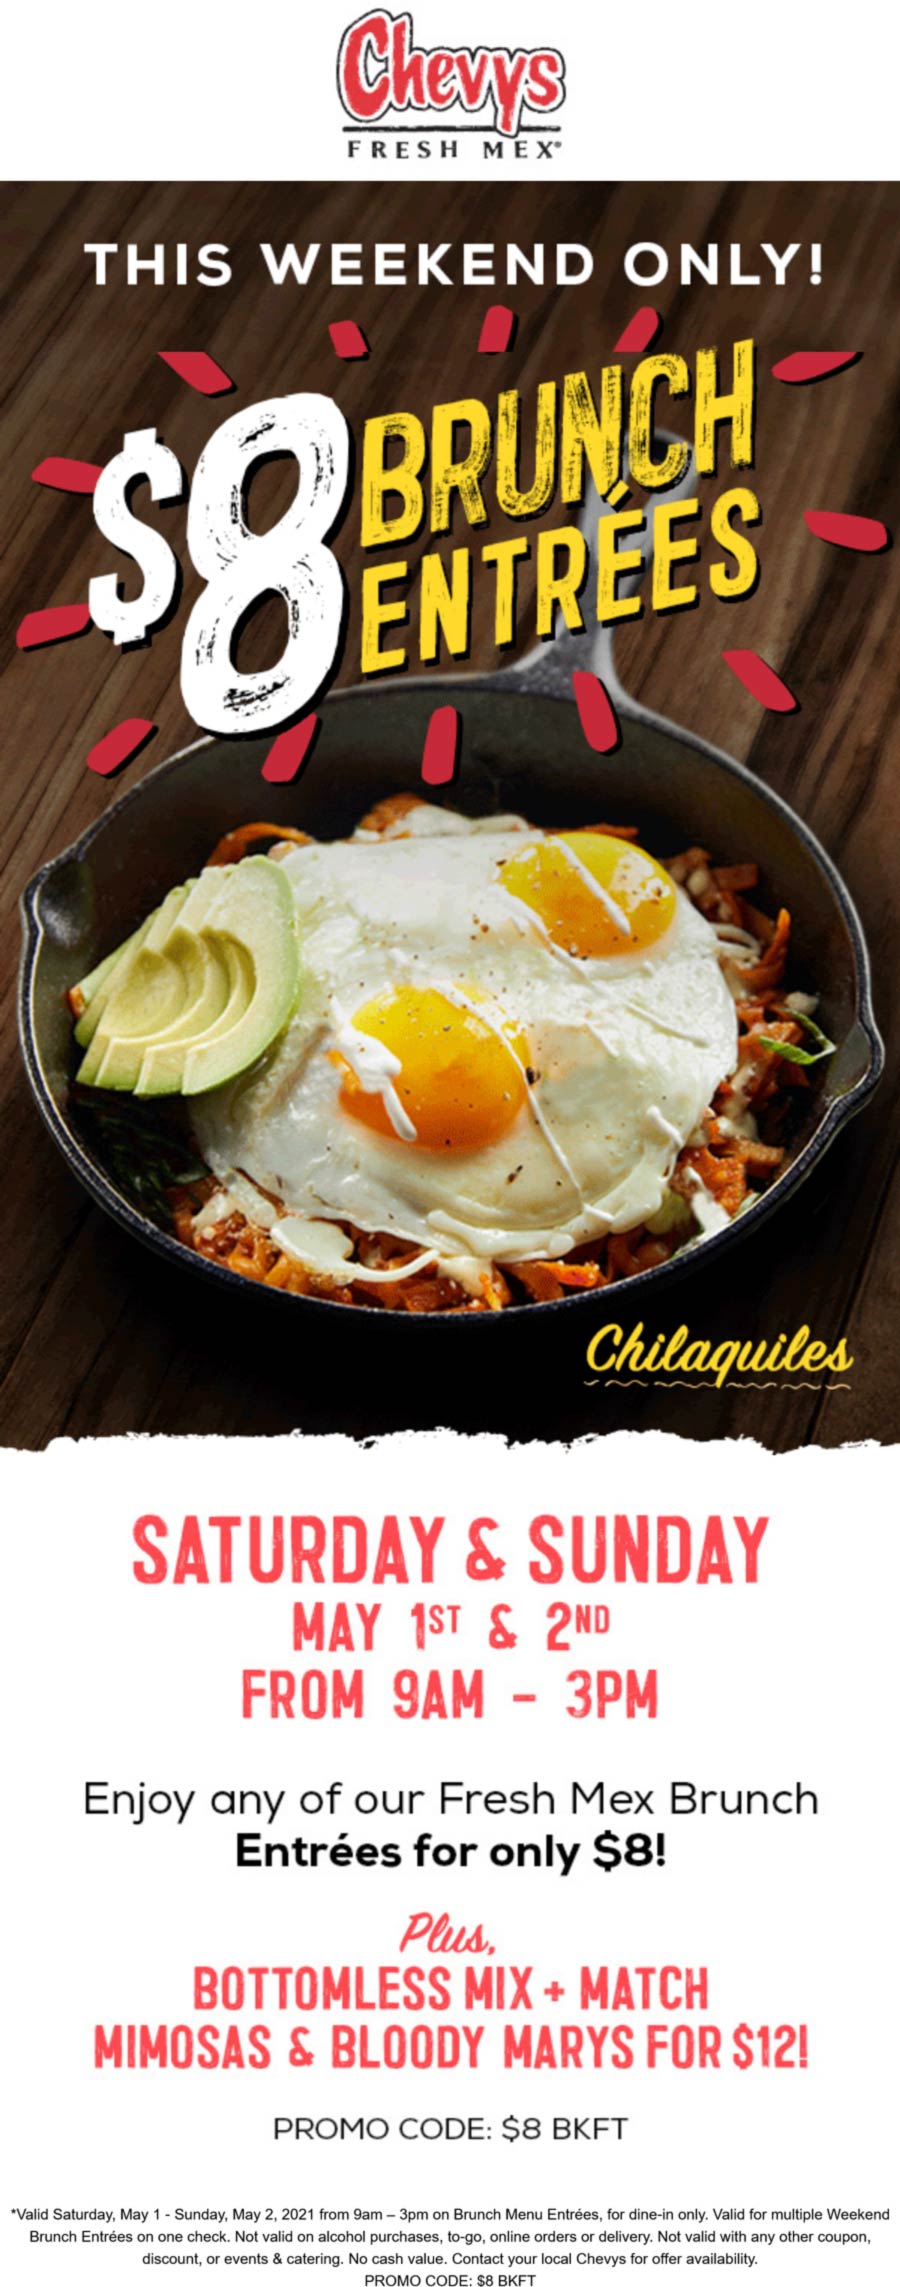 Chevys restaurants Coupon  $8 brunch entrees at Chevys Fresh Mex restaurants #chevys 